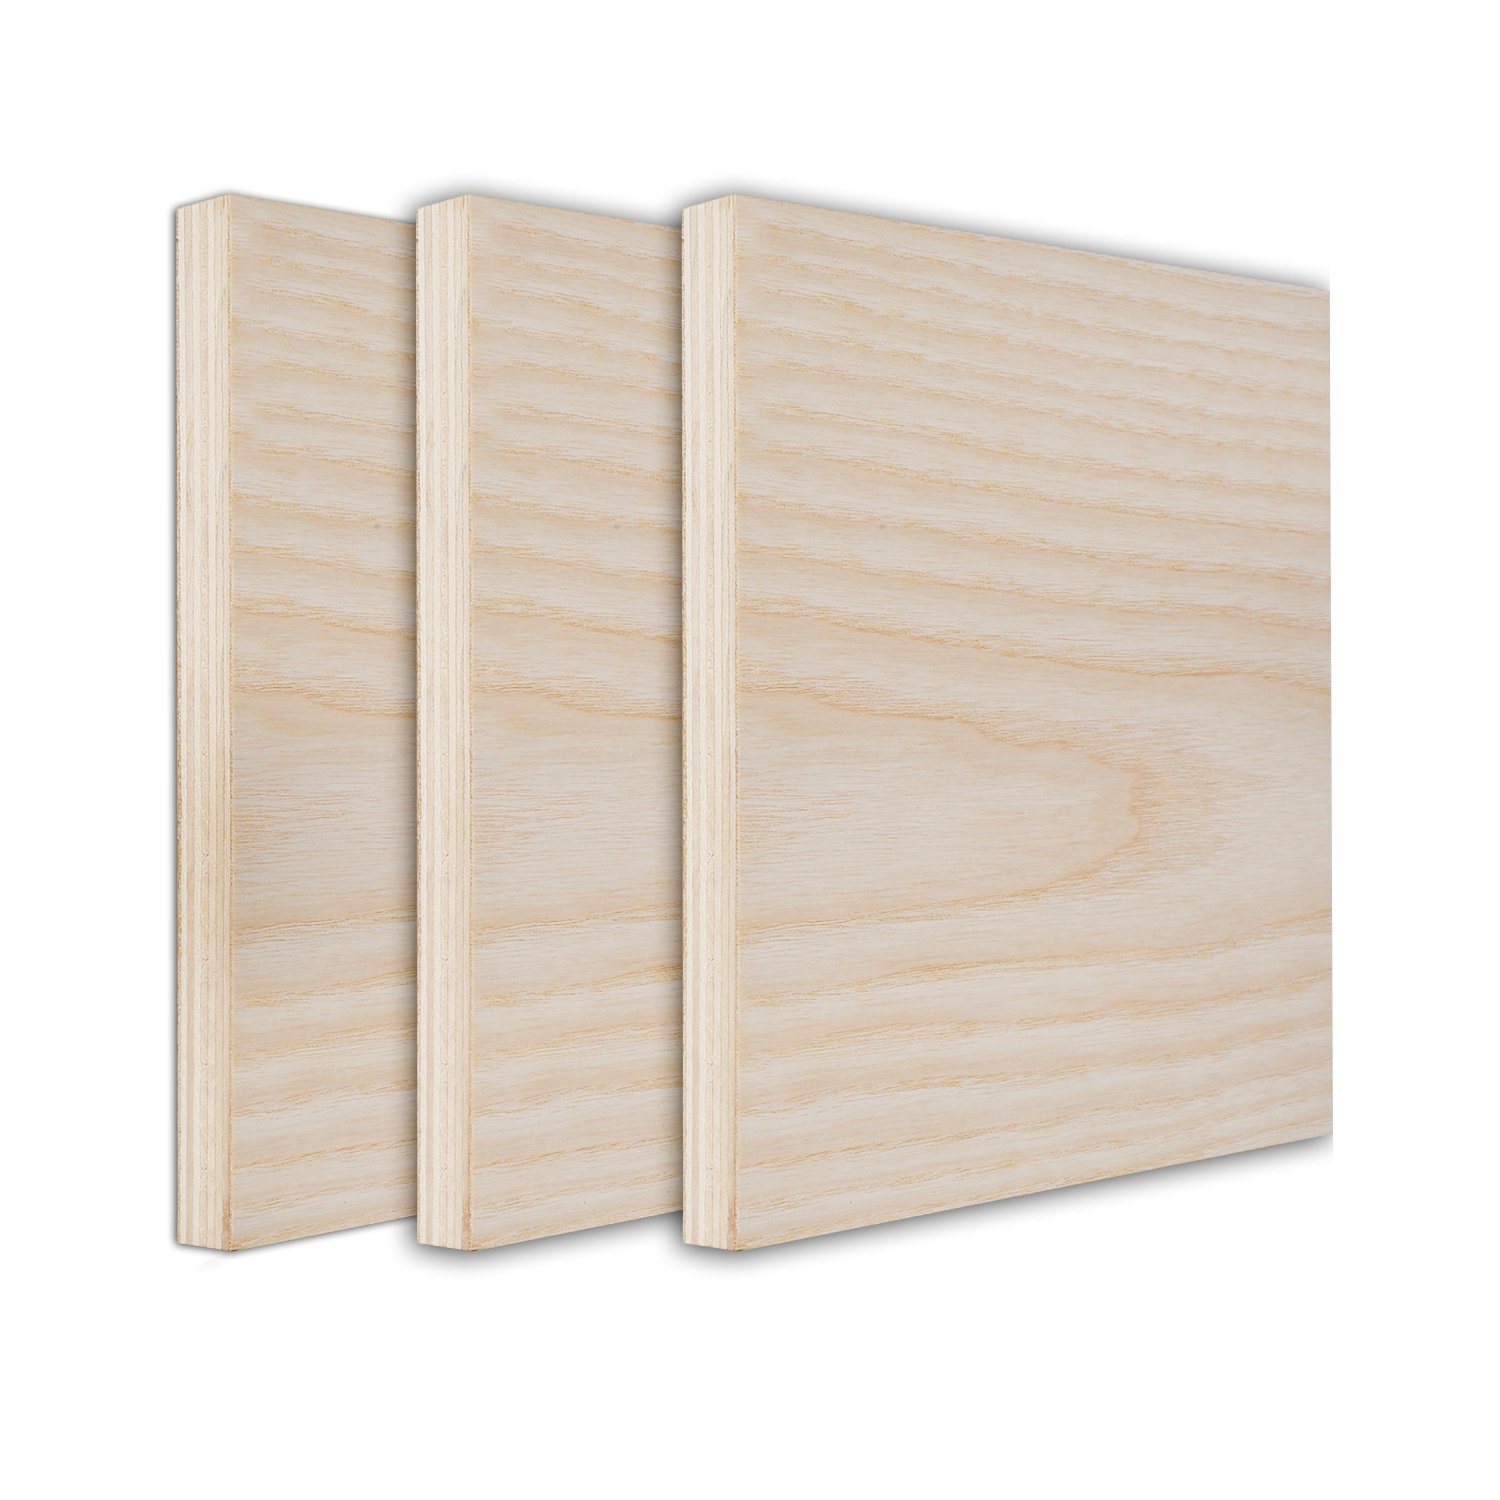 Shandong Province High Quality Oak Wood Faced Ply Wood Fancy Plywood Board for Furniture